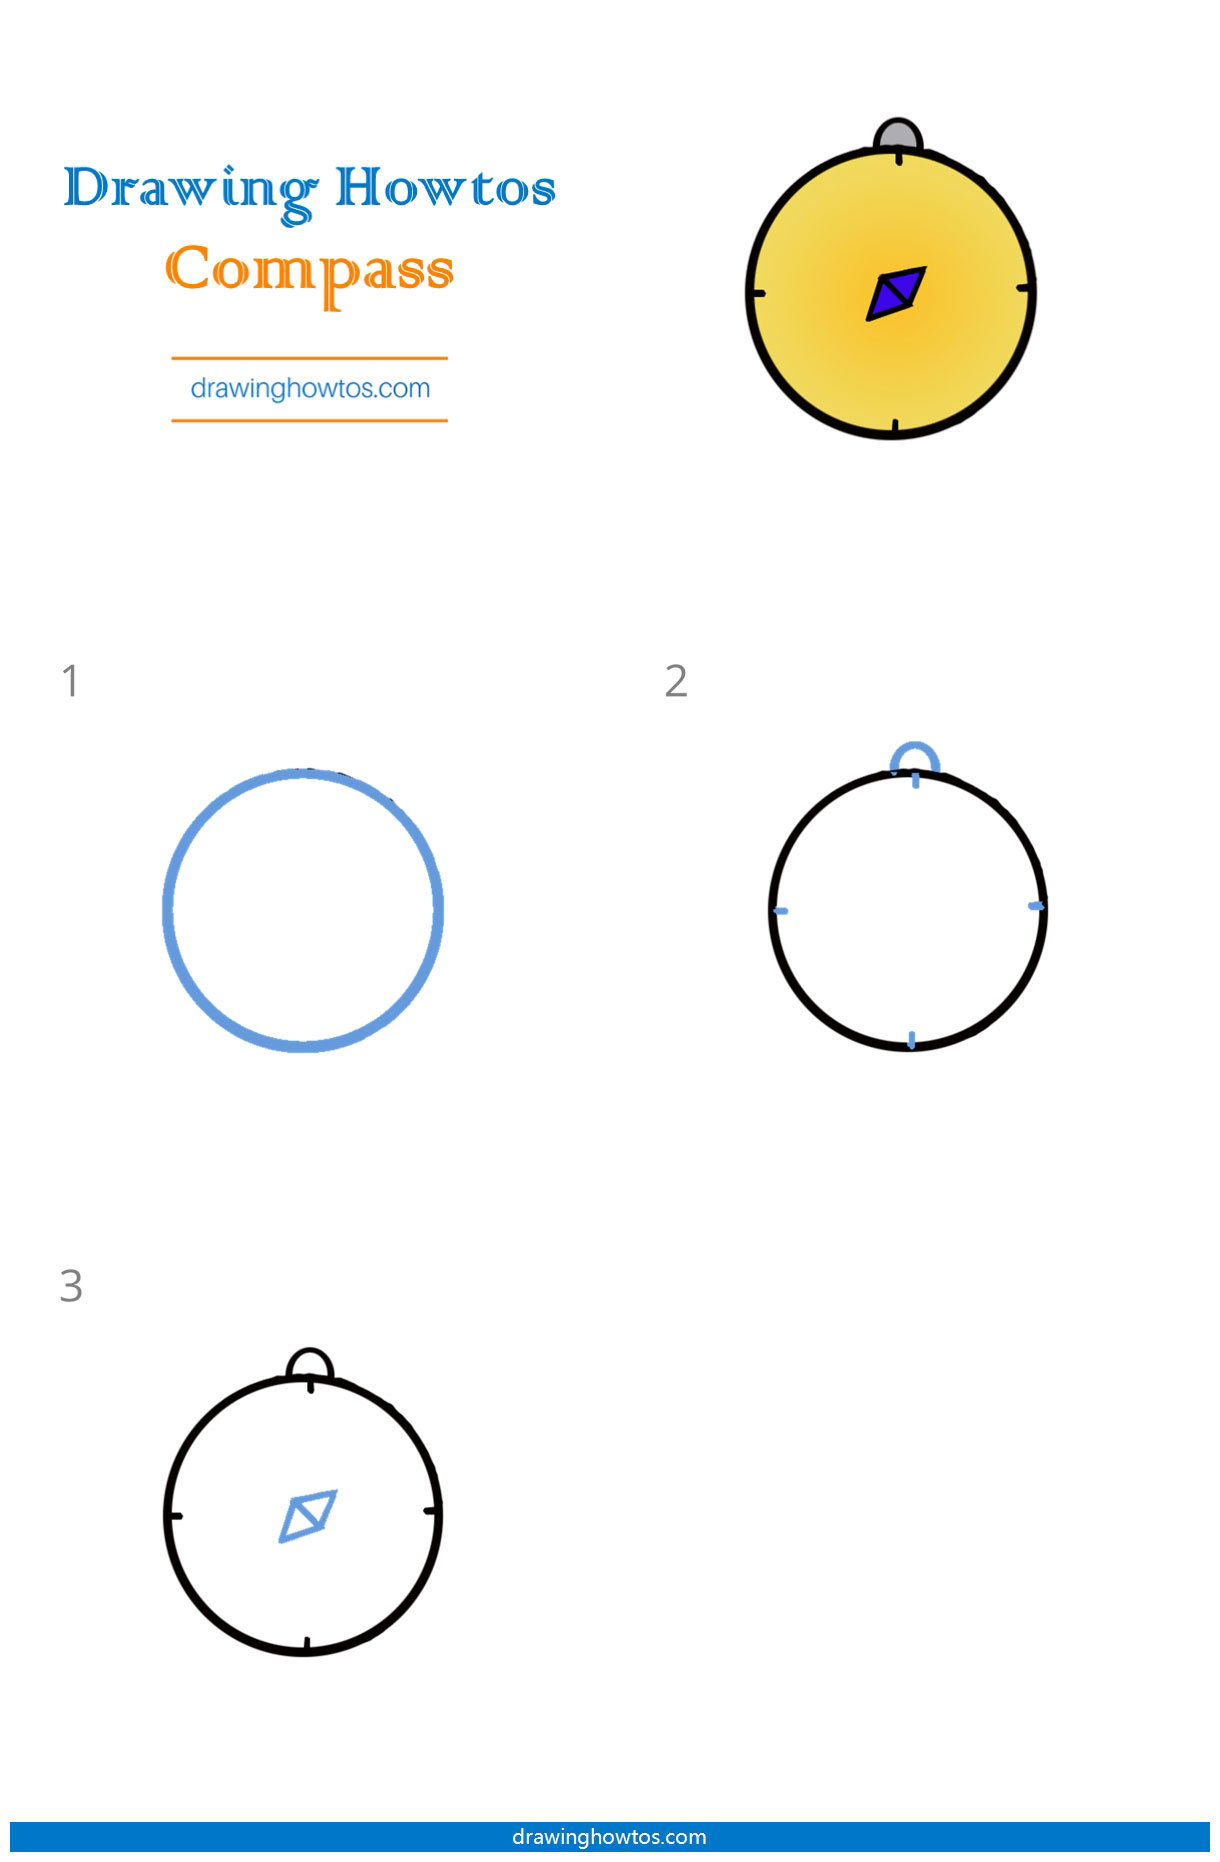 How to Draw a Compass Step by Step